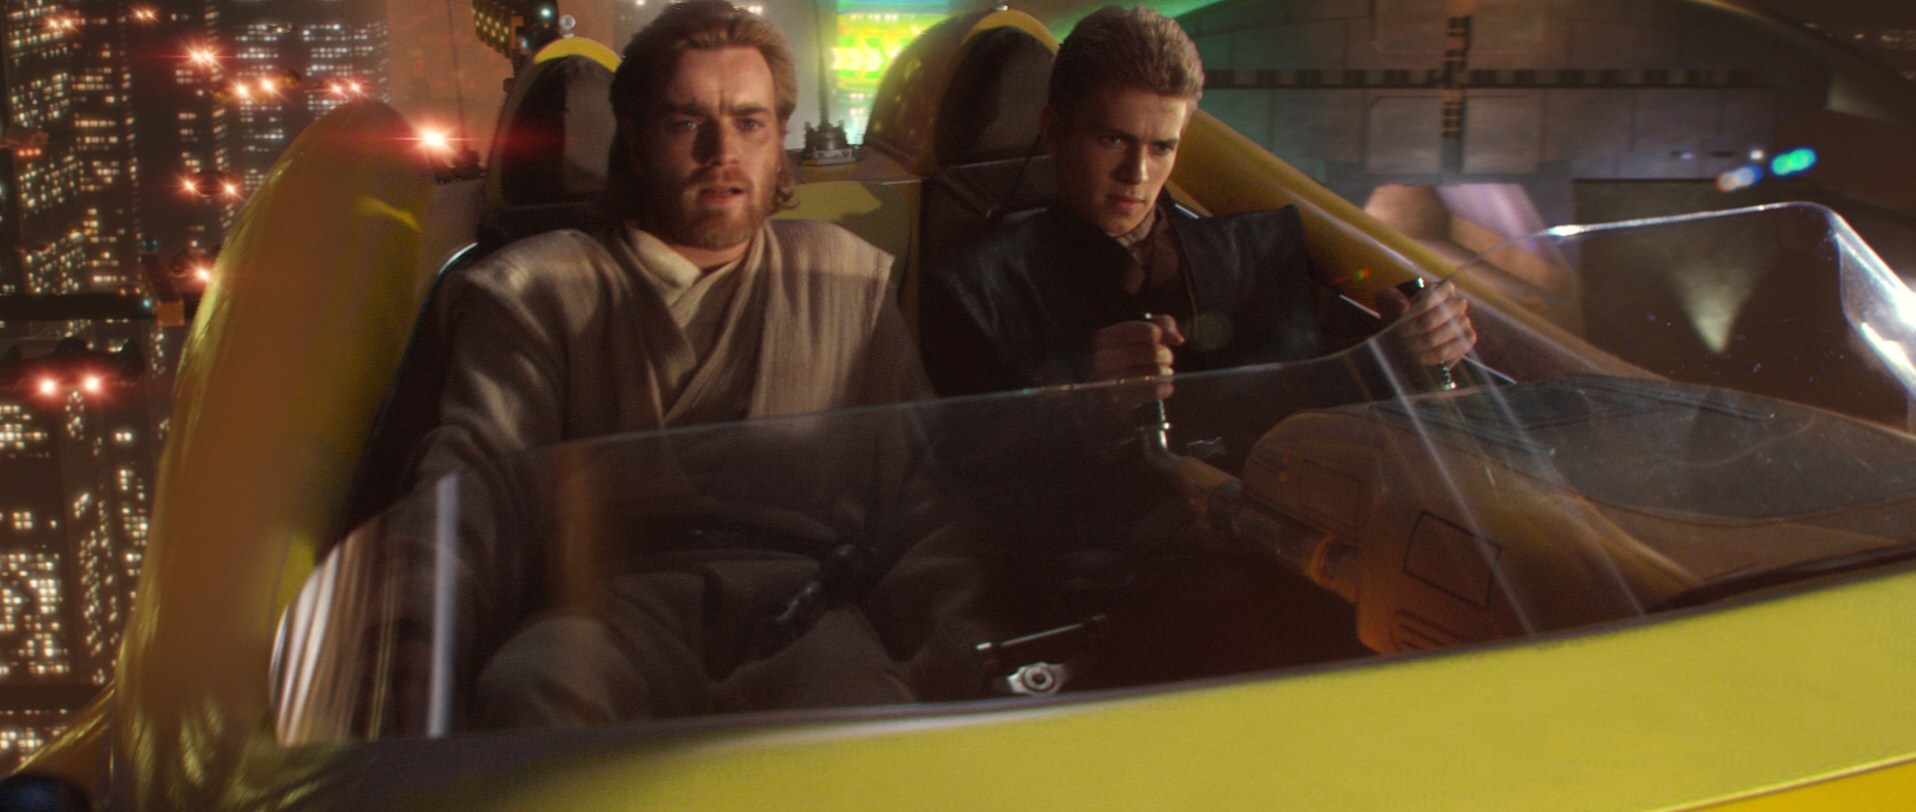 Obi-Wan and Anakin ride in Anakin's airspeeder in Attack of the Clones.